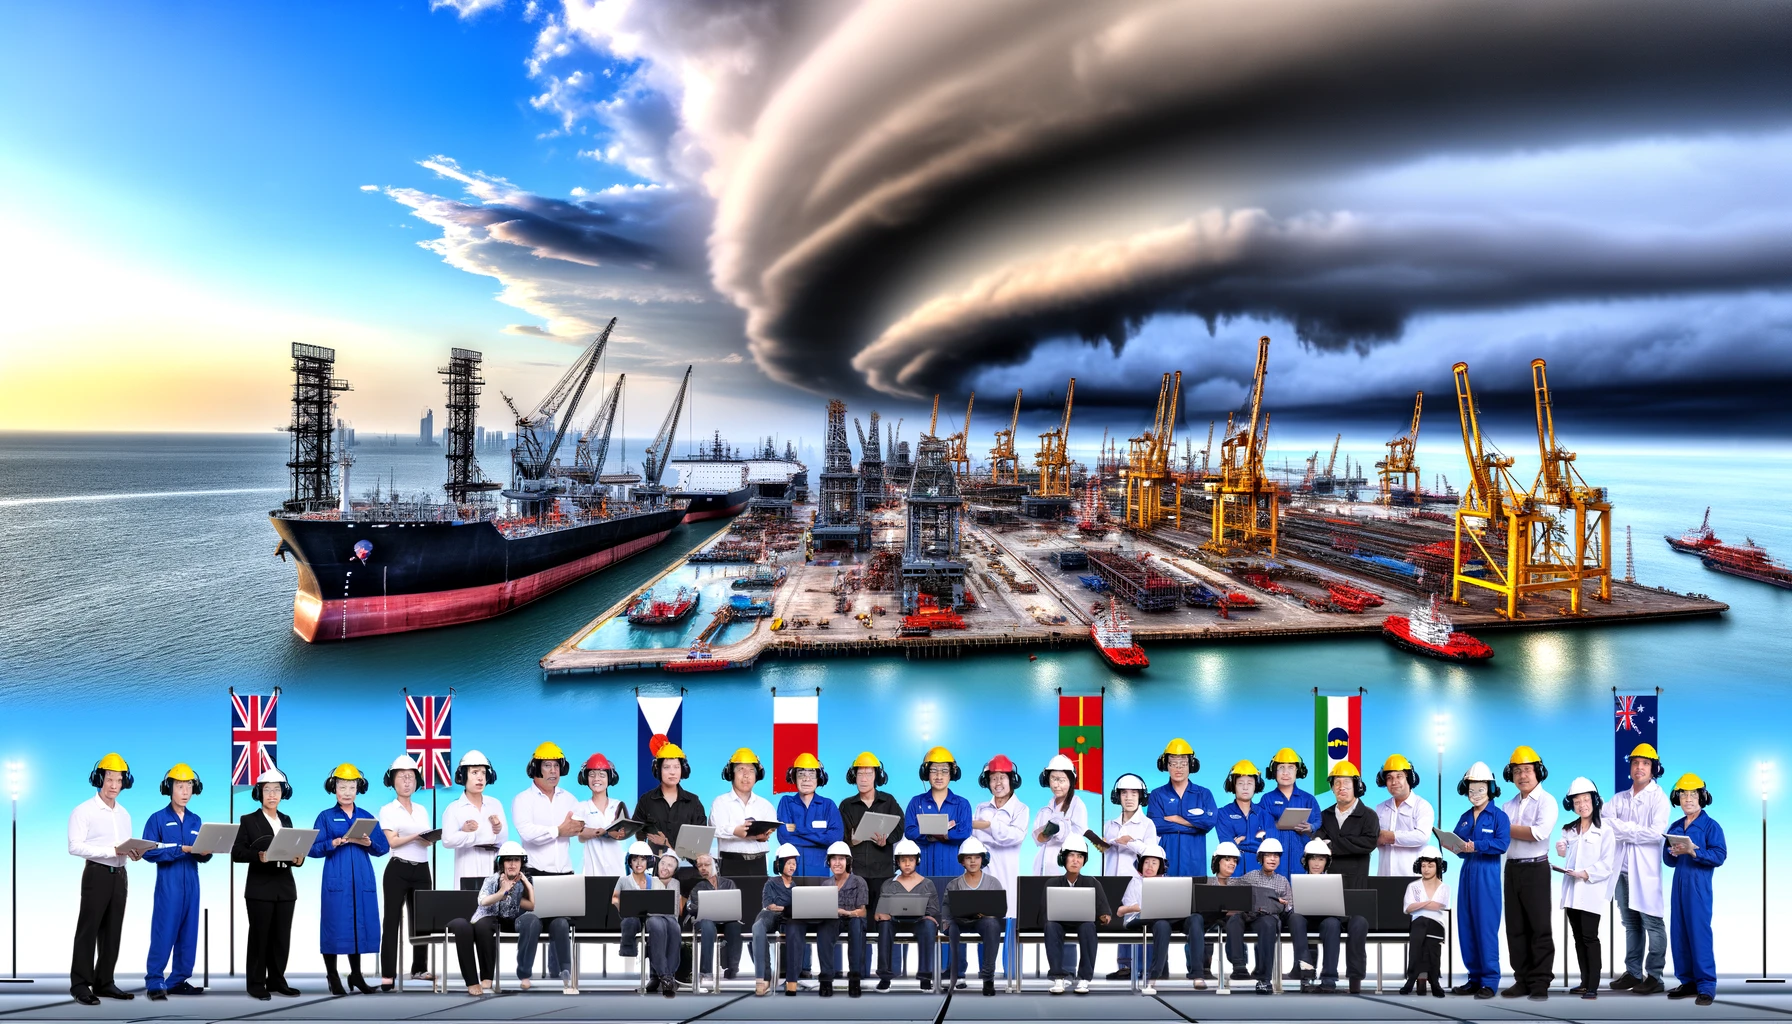 maritime-and-offshore-machinery-industry-blog